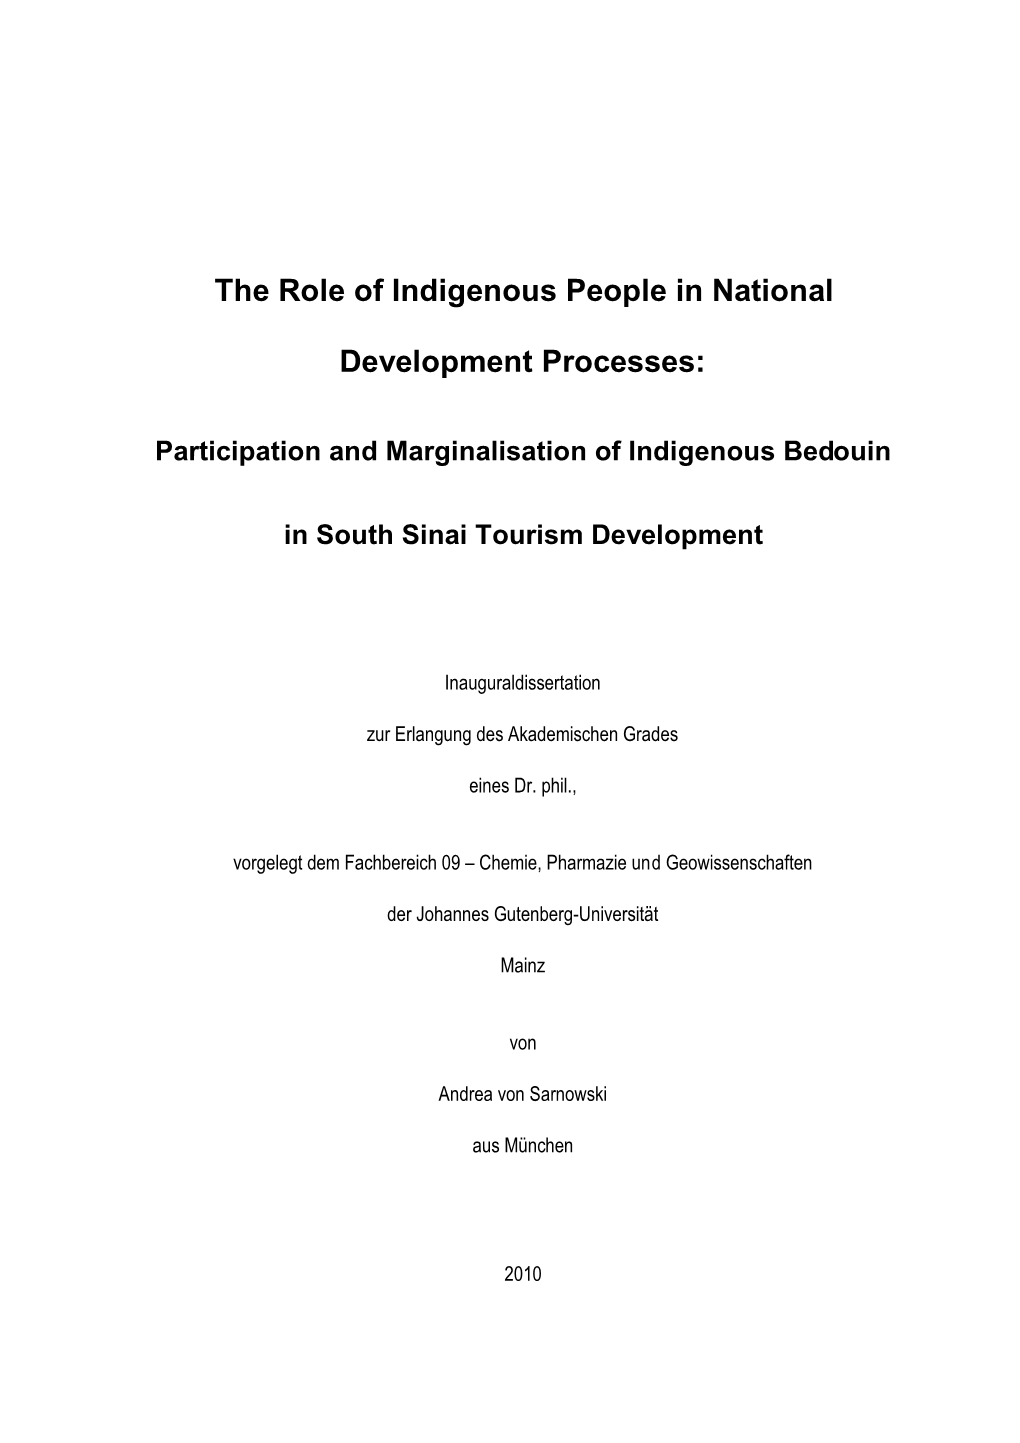 The Role of Indigenous People in National Development Processes